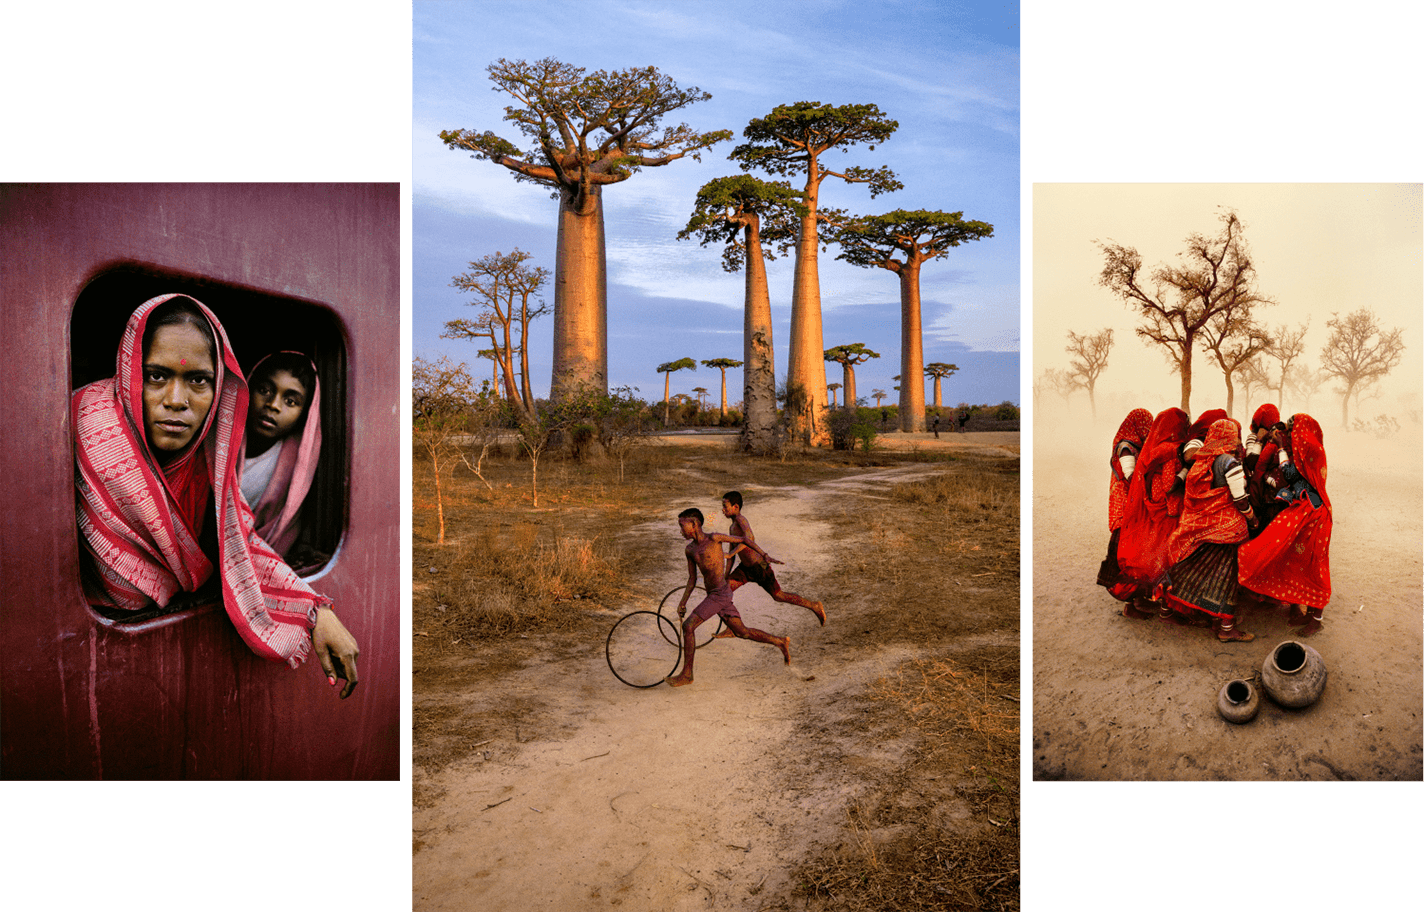 An Extraordinary Photography Exhibition - Steve McCurry ICONS in Lisbon: A Photography Exhibit